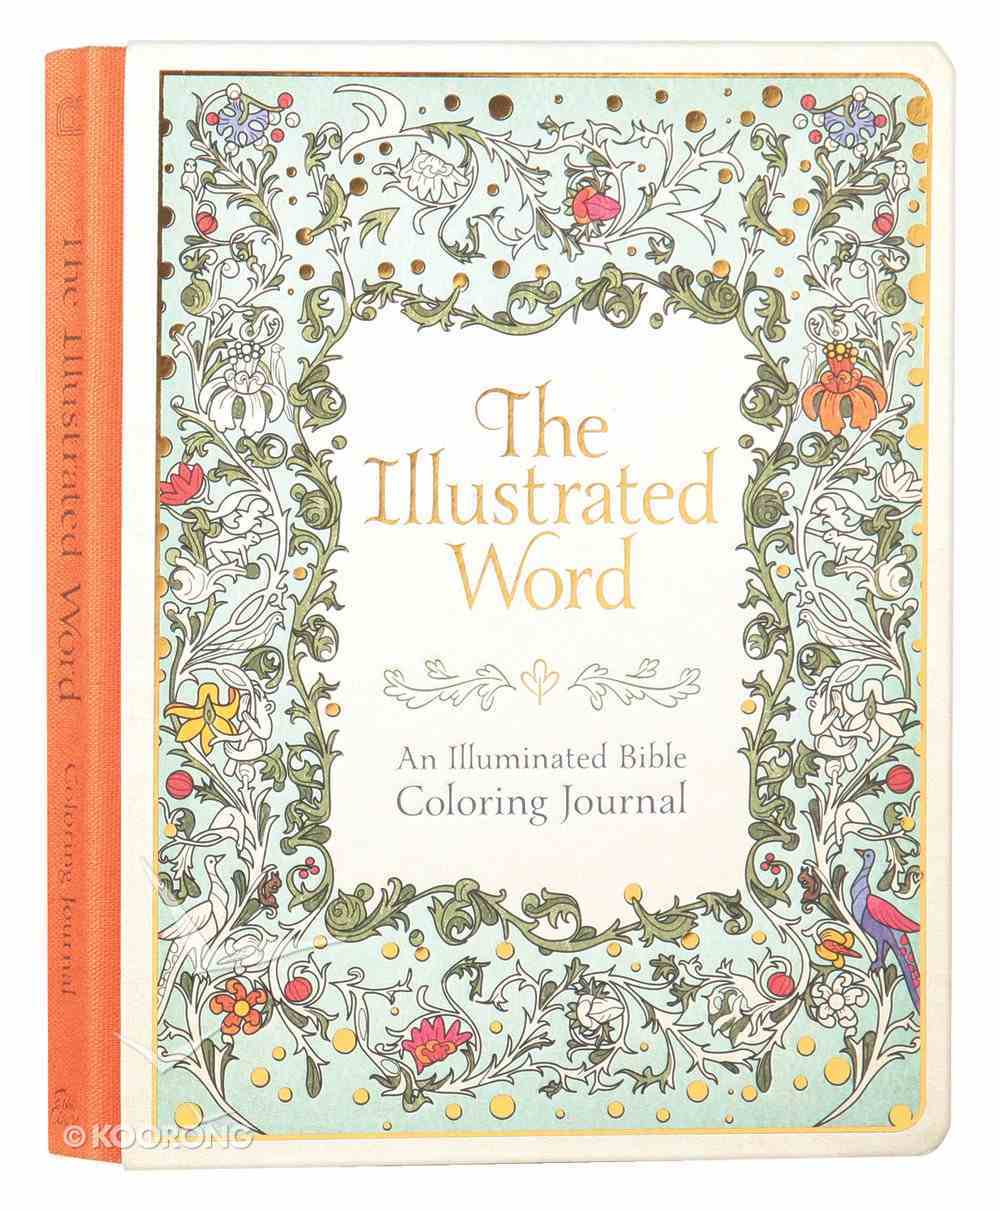 Illustrated Word, The: An Illuminated Coloring Bible Journal (Adult Coloring Books Series) Hardback